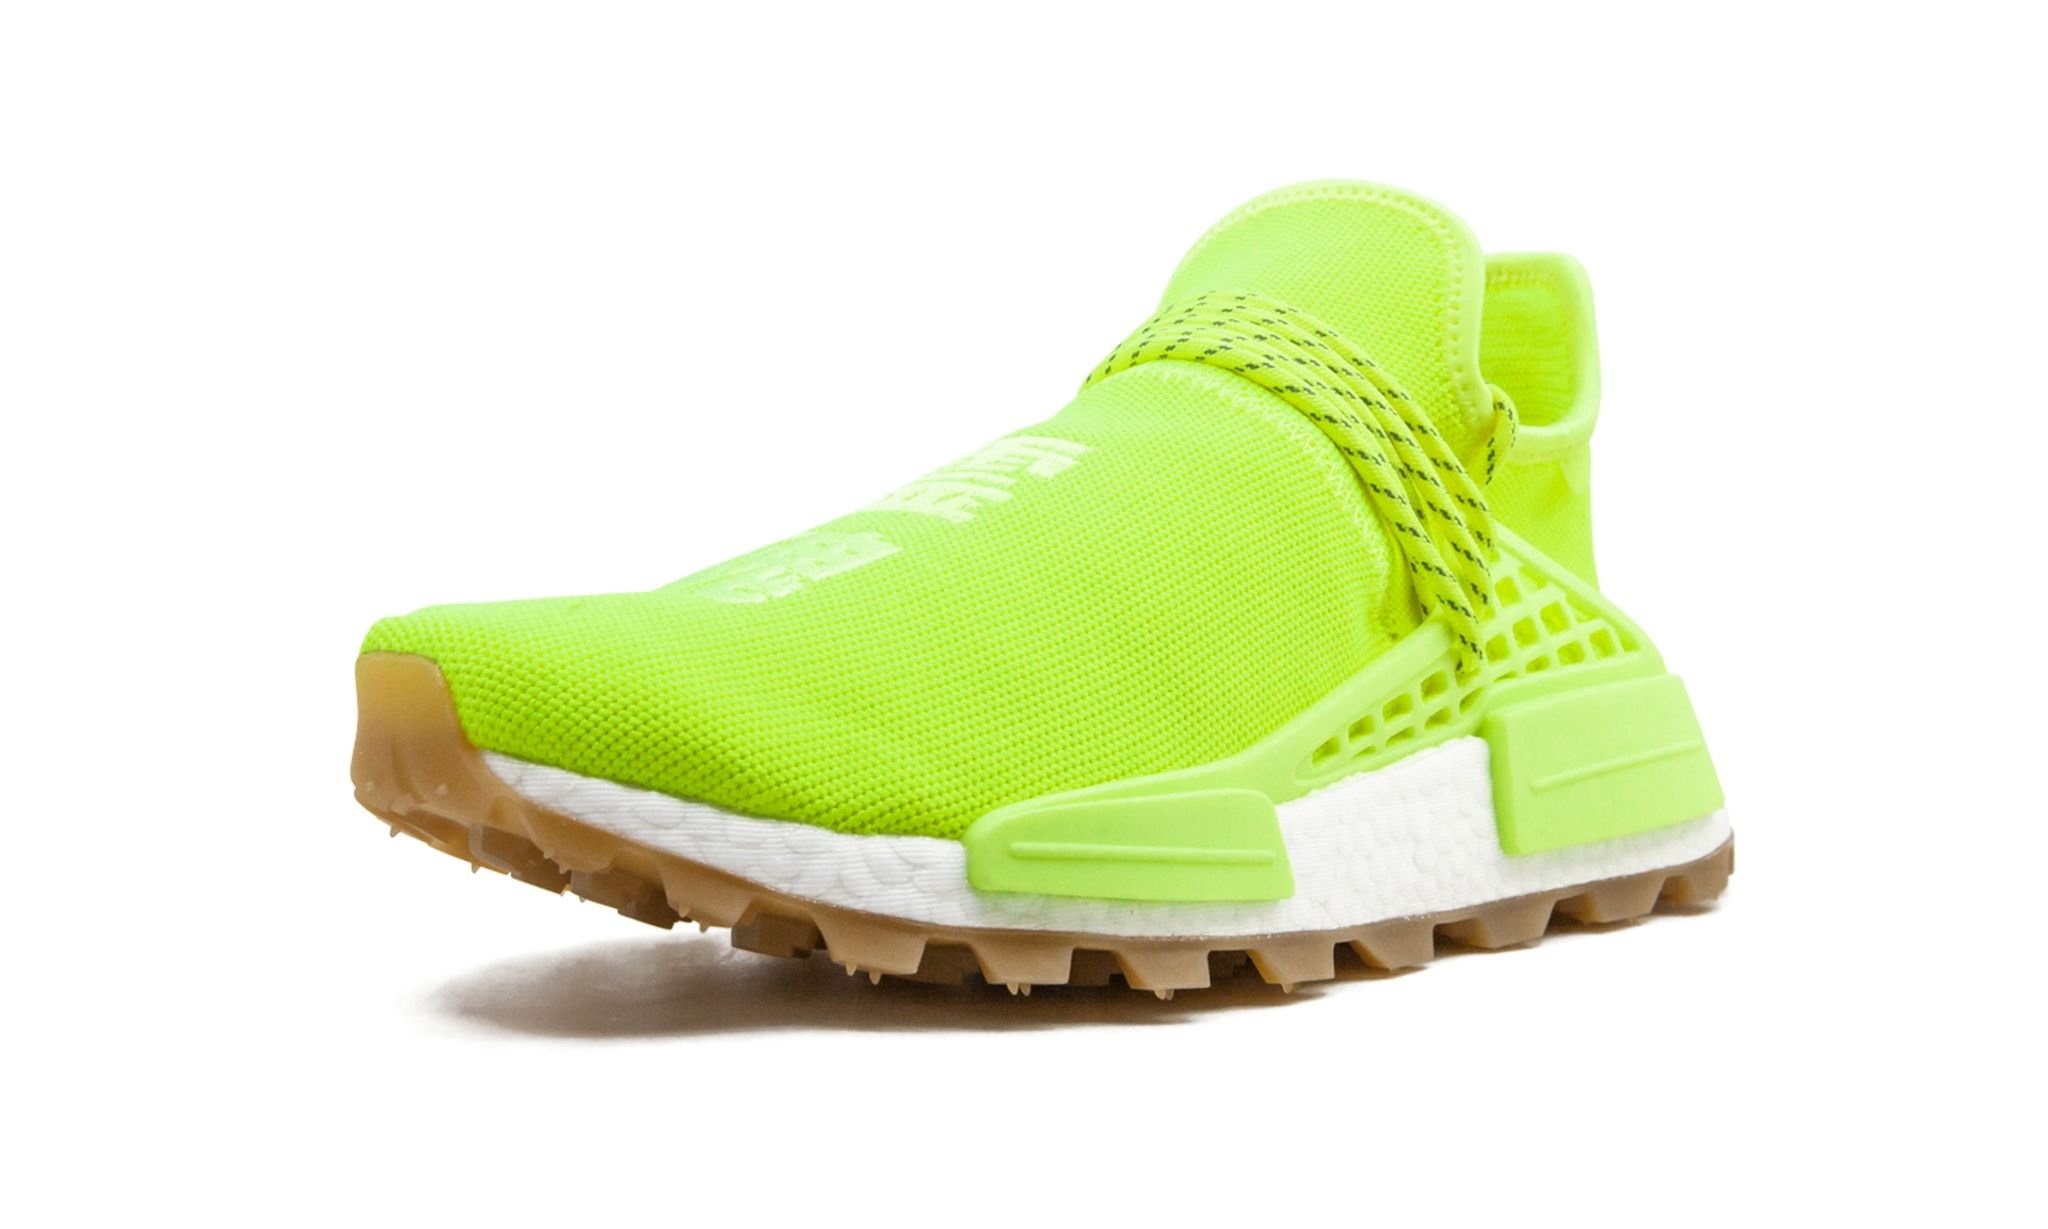 NMD Humanrace Trail "Pharrell Williams - Now Is Her Time Pack Solar Yellow" - 4